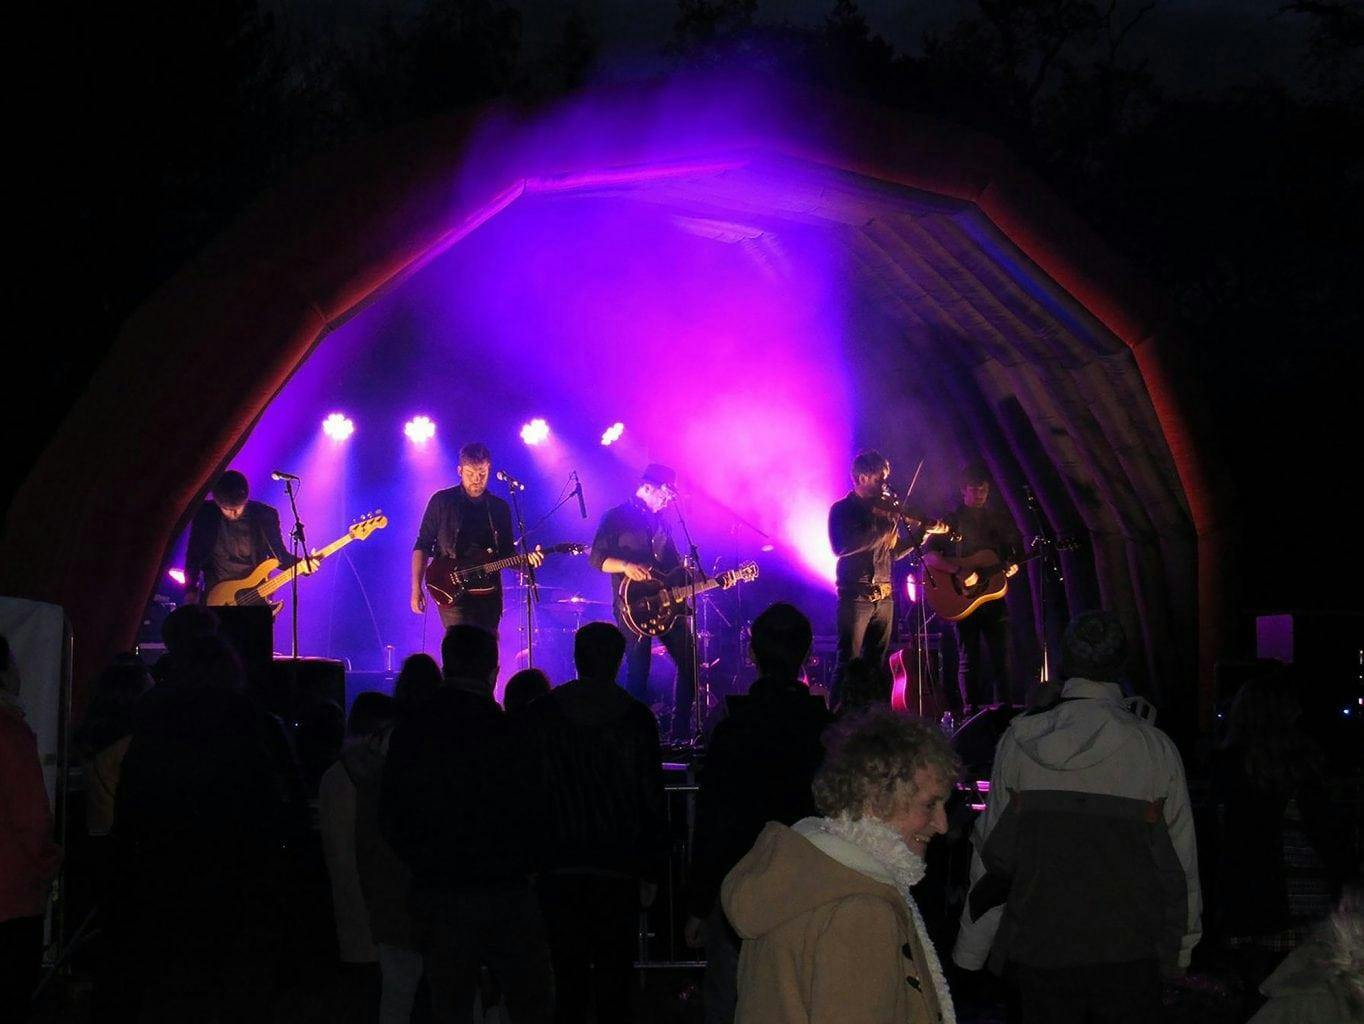 A band on a stage lit with purple lights with a crowd in front.